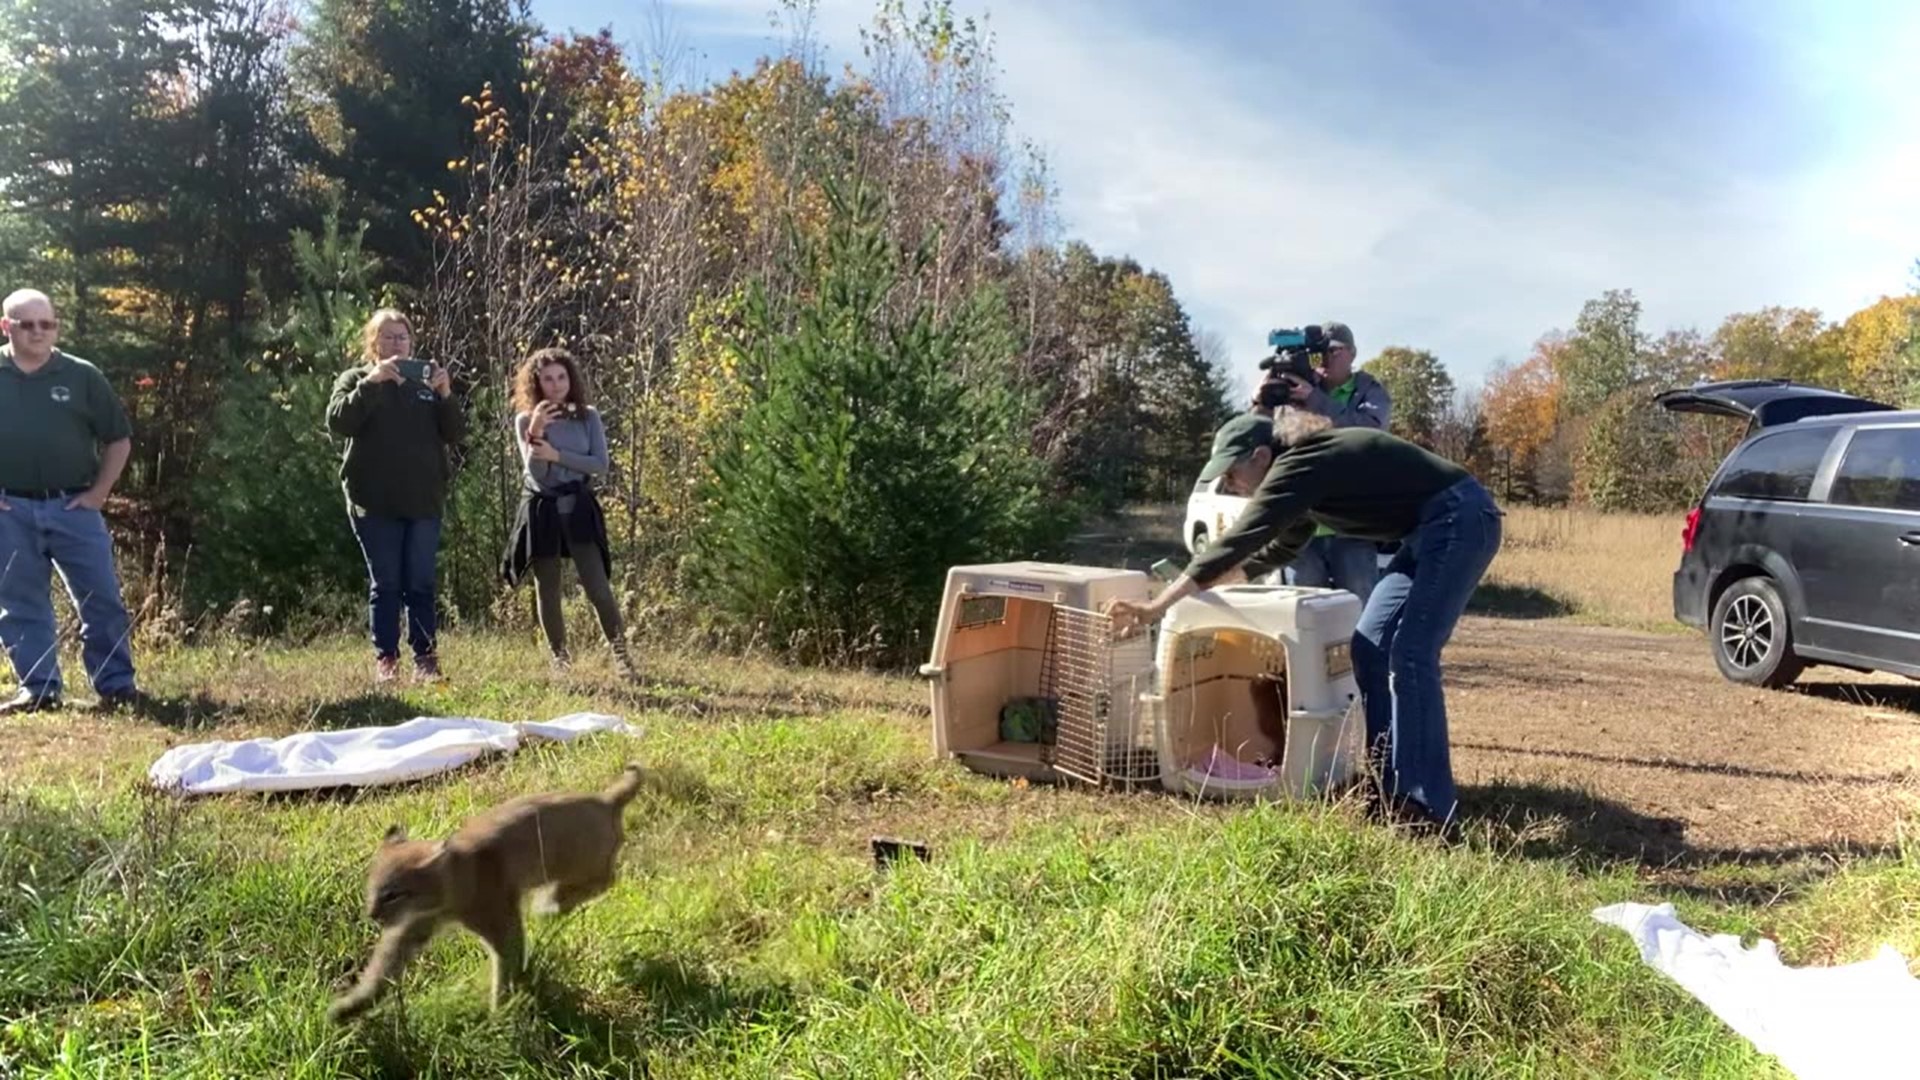 The bobcats that were recovering at a wildlife center in the Poconos, have been released back into a natural habitat.